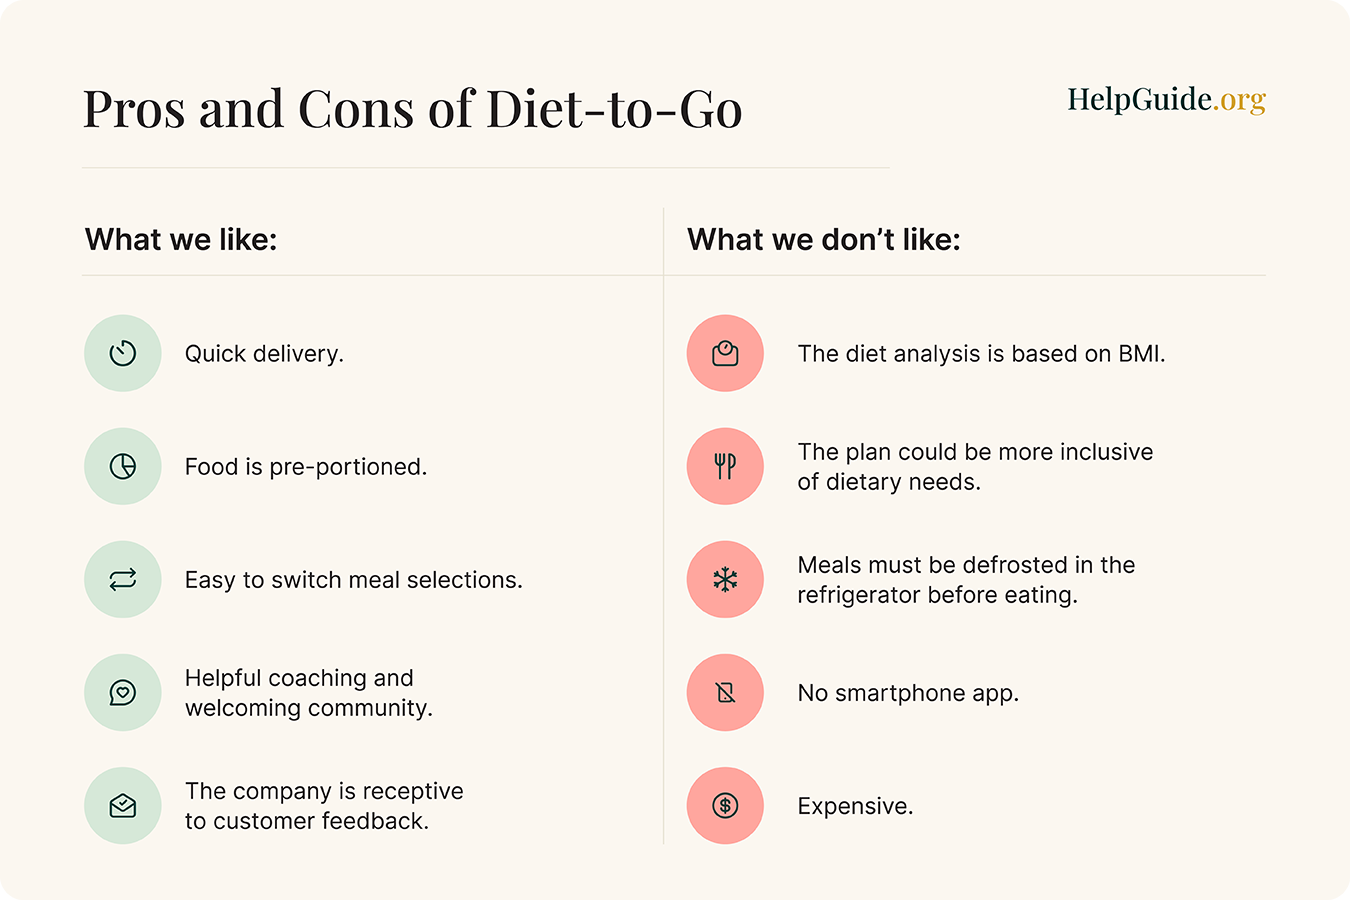 A list of pros and cons of the Diet-to-Go brand